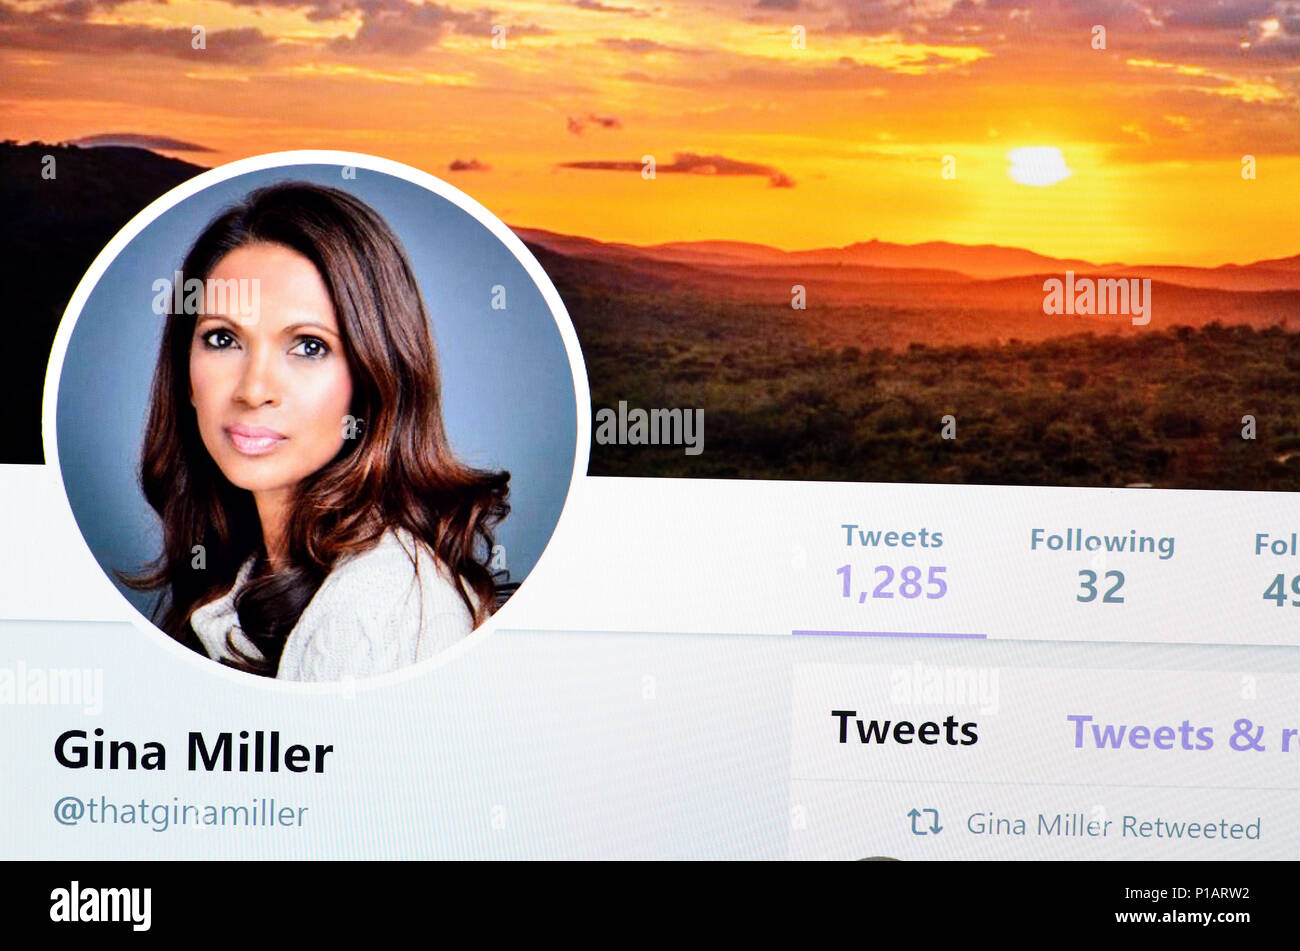 Gina Miller account Twitter home page (giugno 2018) Foto Stock